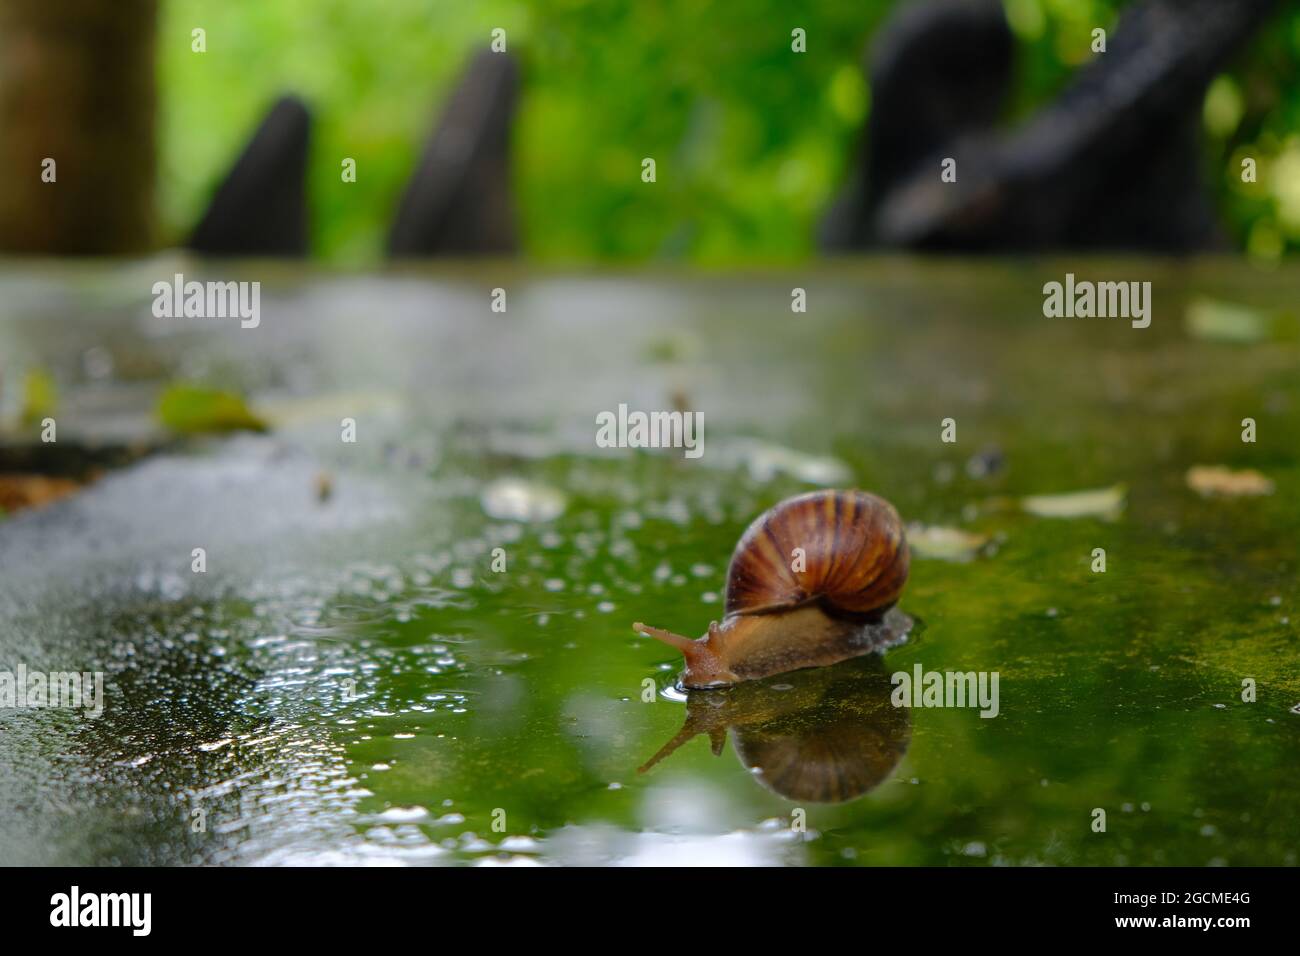 Big snail gliding on the wet floor in the summer garden. Large mollusk snails with light brown striped shell, crawling on moss. Stock Photo